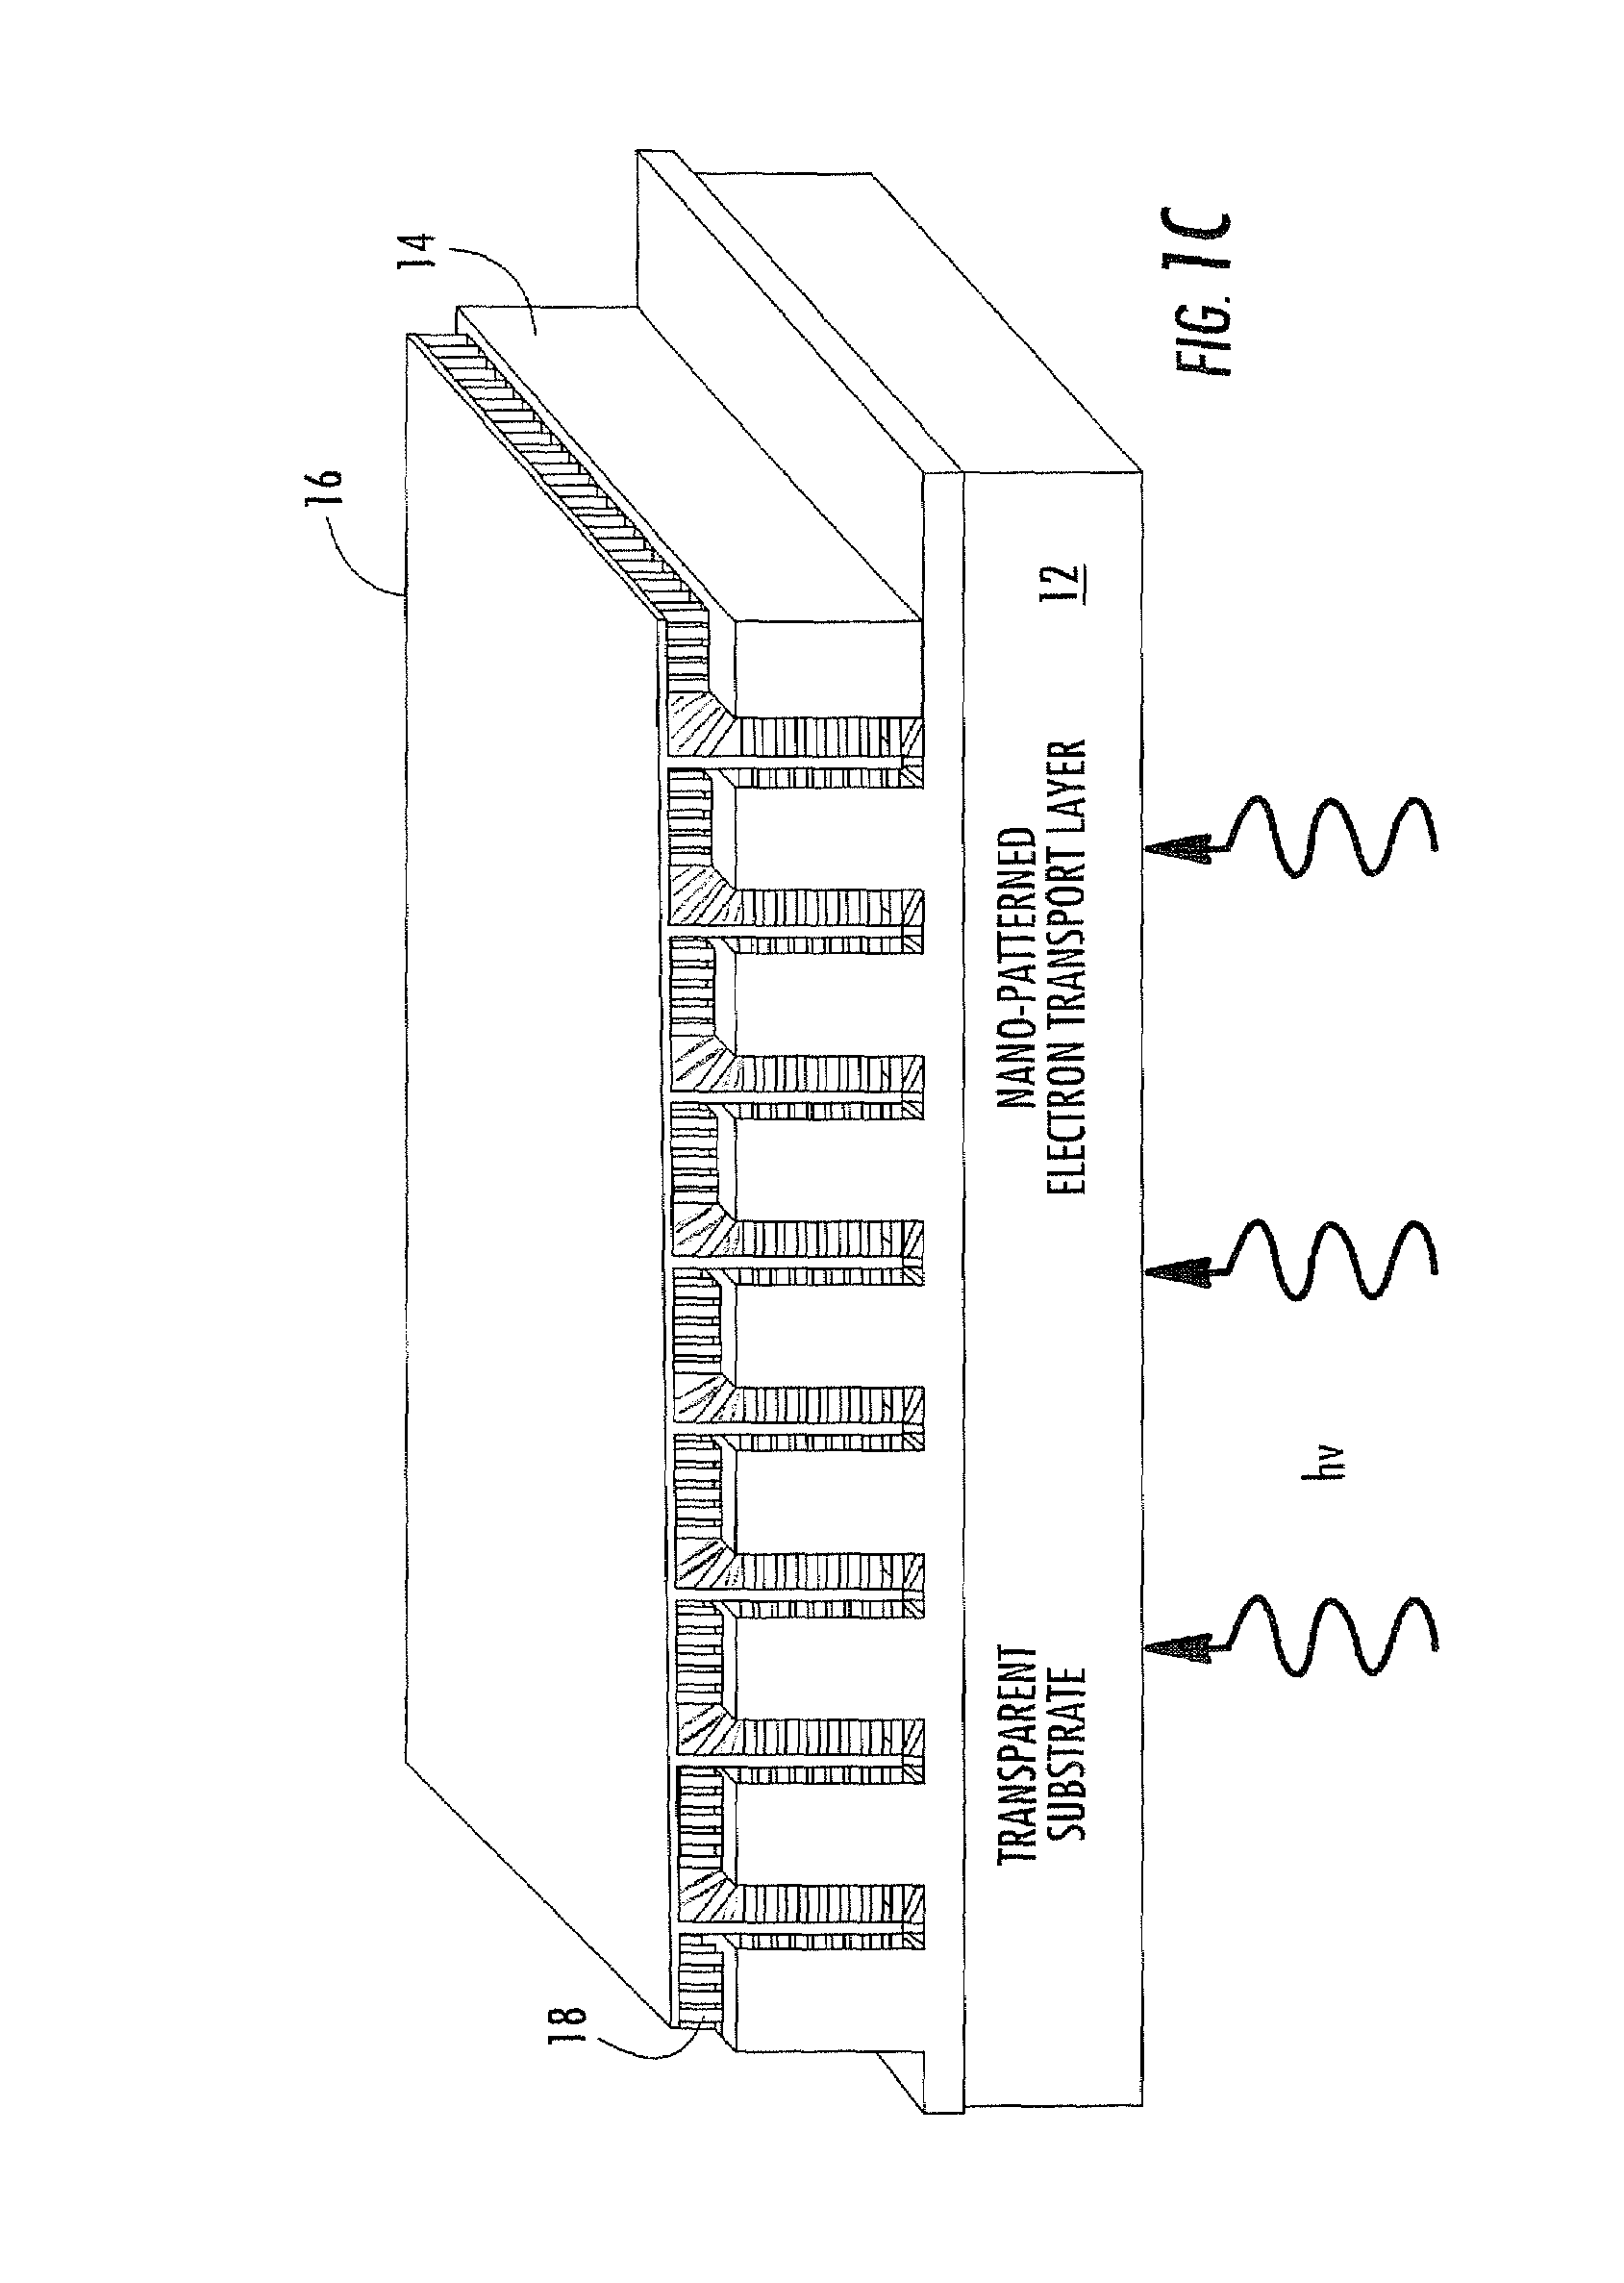 Nano-structured photovoltaic solar cell and related methods